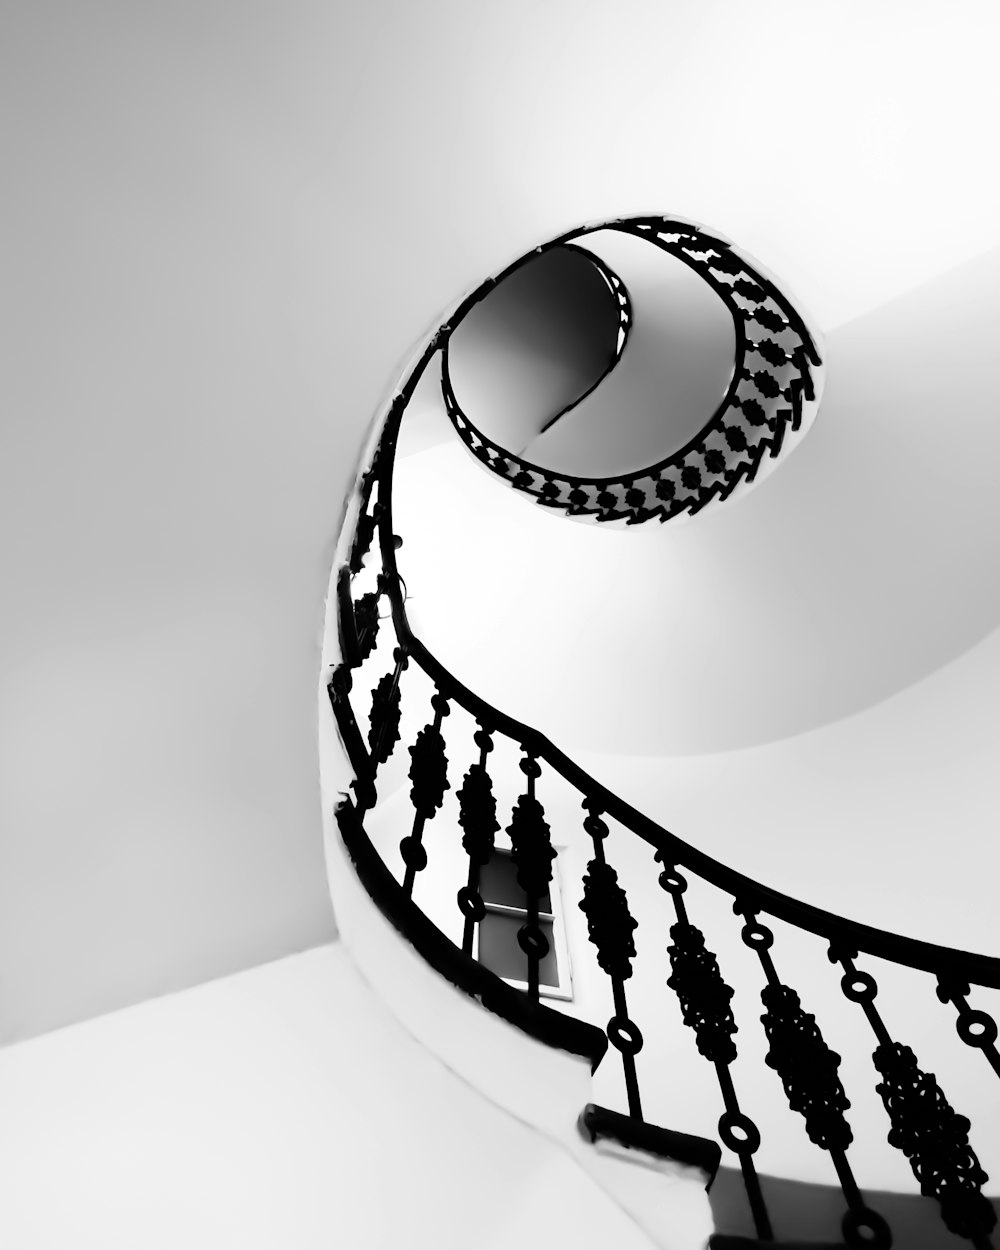 structural photography of spiral house stairs